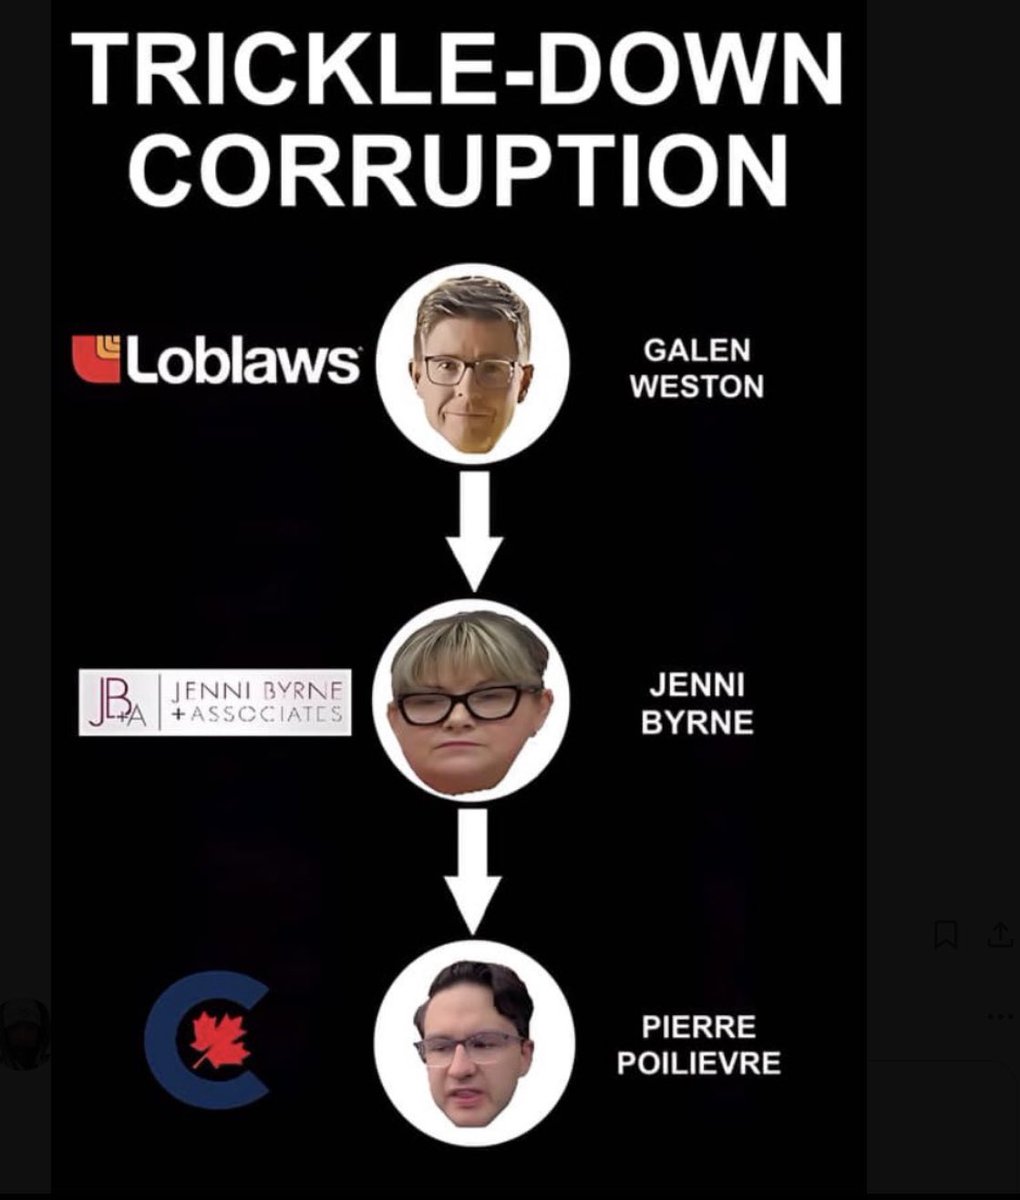 @RGBAtlantica I stopped shopping at all @LoblawsON owned stores a few years ago. Cancelled PC Optimum & PC Mastercard. Better deals elsewhere.
Galen Weston highjacking #Healthcare is disgraceful. 
Say no to privatization, stop funding them. 
#BoycottLoblaws #Roblaws